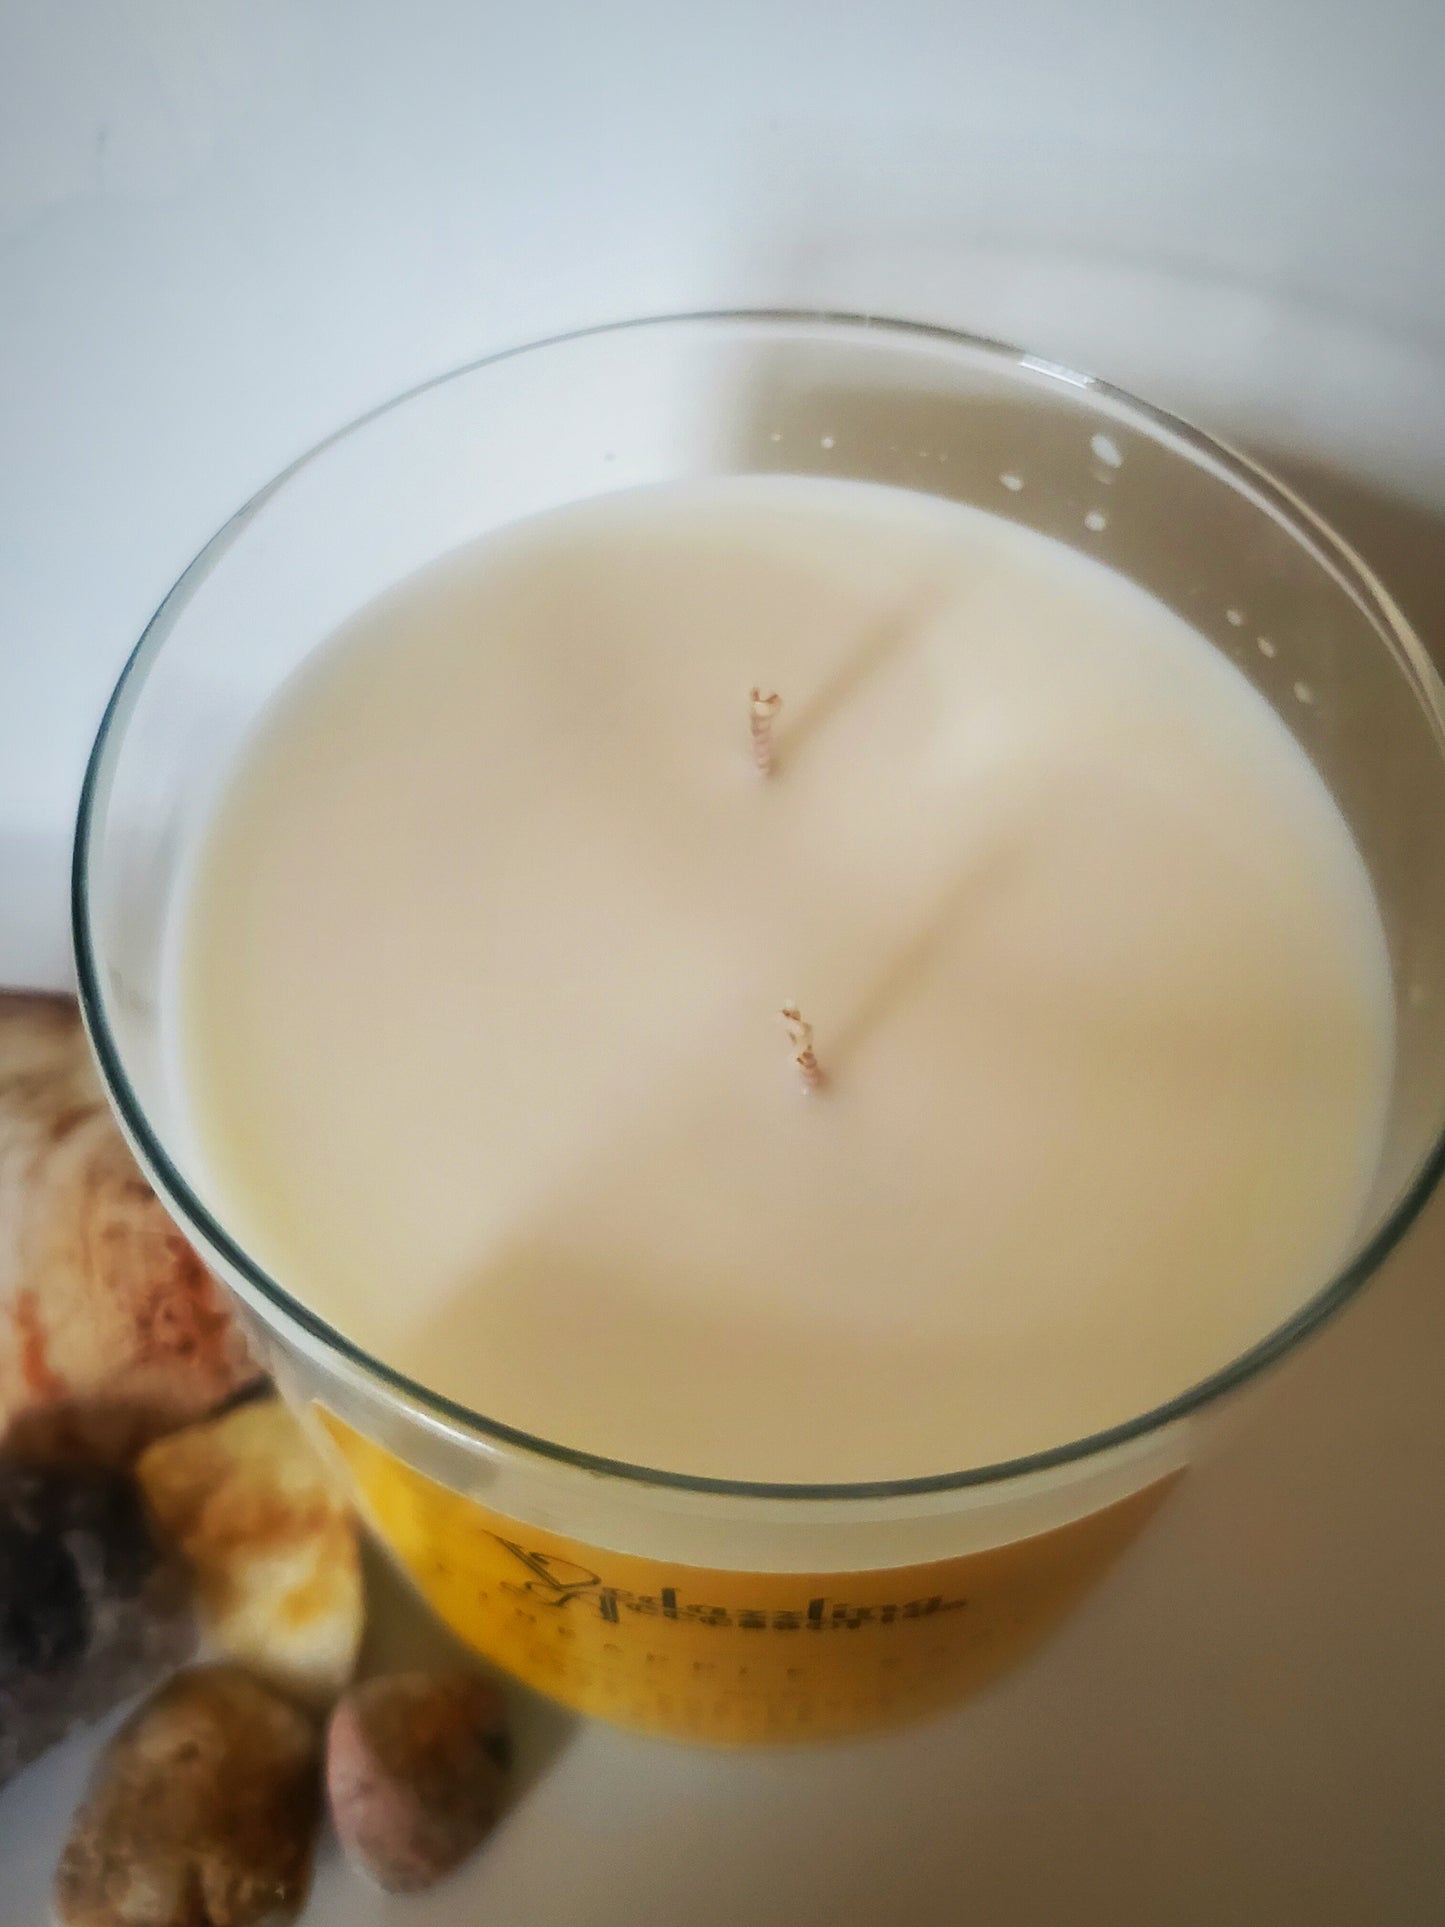 Pineapple Sage Candle- Vedazzling Accessories